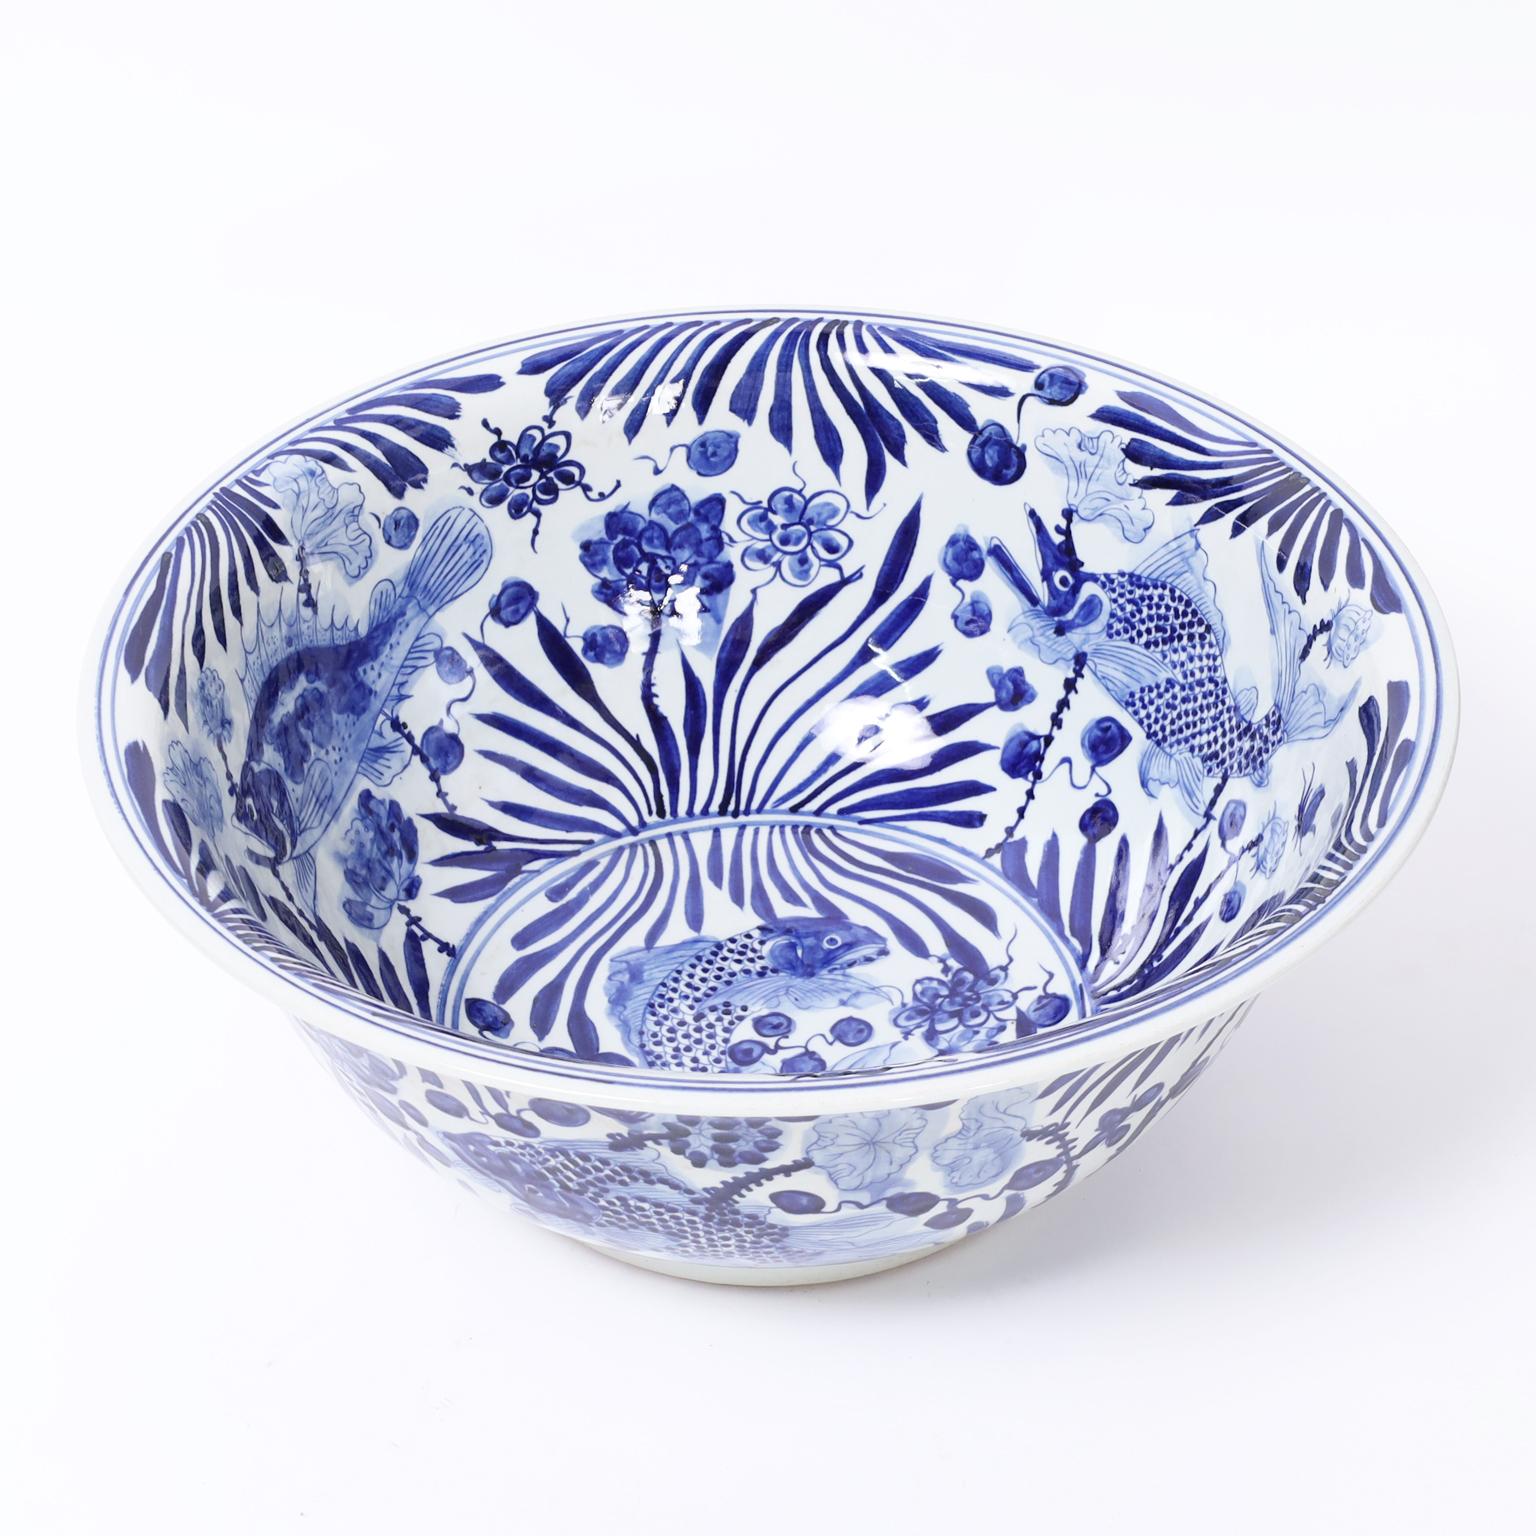 Lofty large Chinese blue and white bowl hand decorated with aquatic fauna and flora having a rare touch of whimsy. 